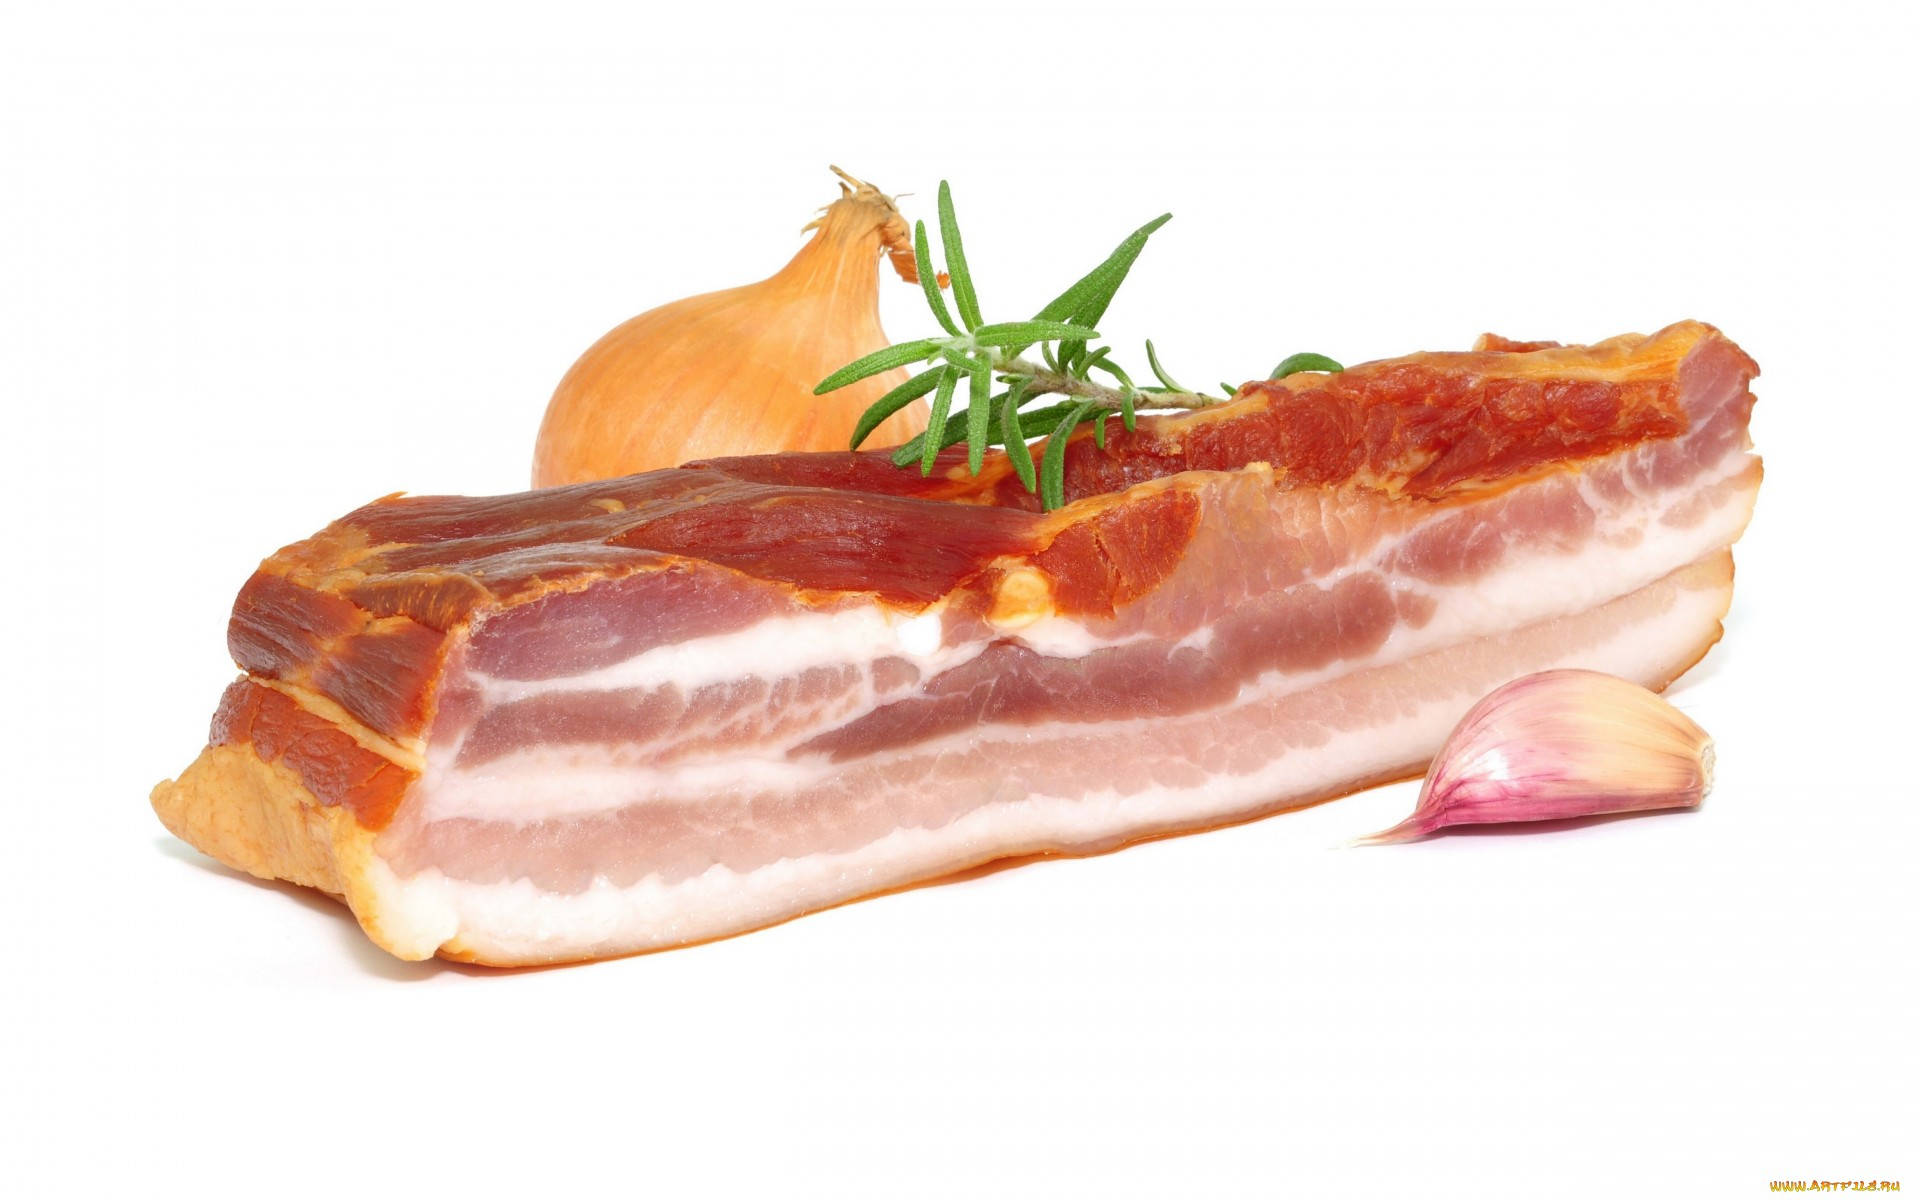 Uncut And Raw Bacon Meat With Onion Background